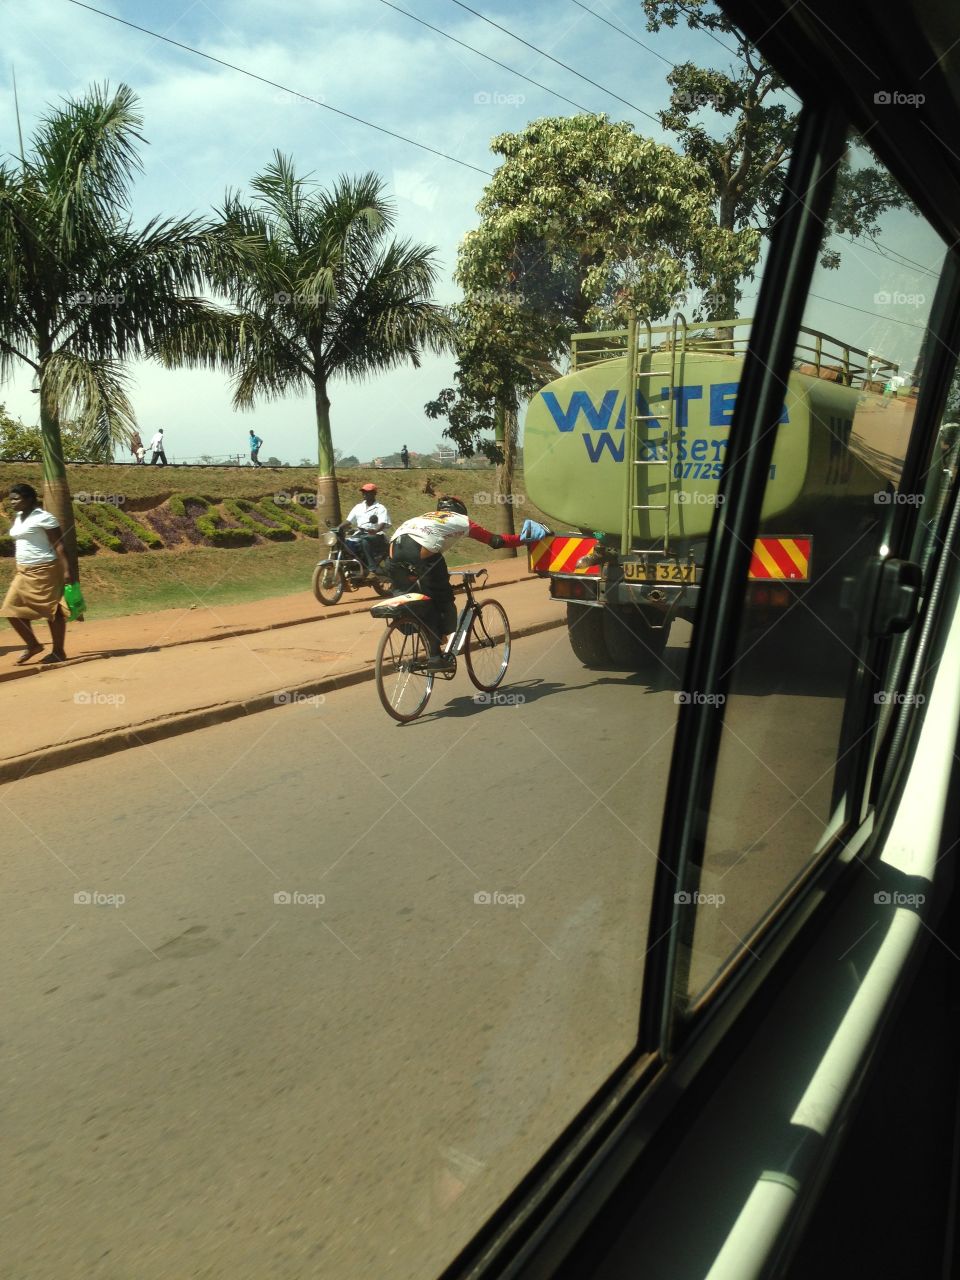 Good ol' Uganda . This picture is exactly what it looks like... You just can't tell we were moving at 30mph with the occasional speed bump